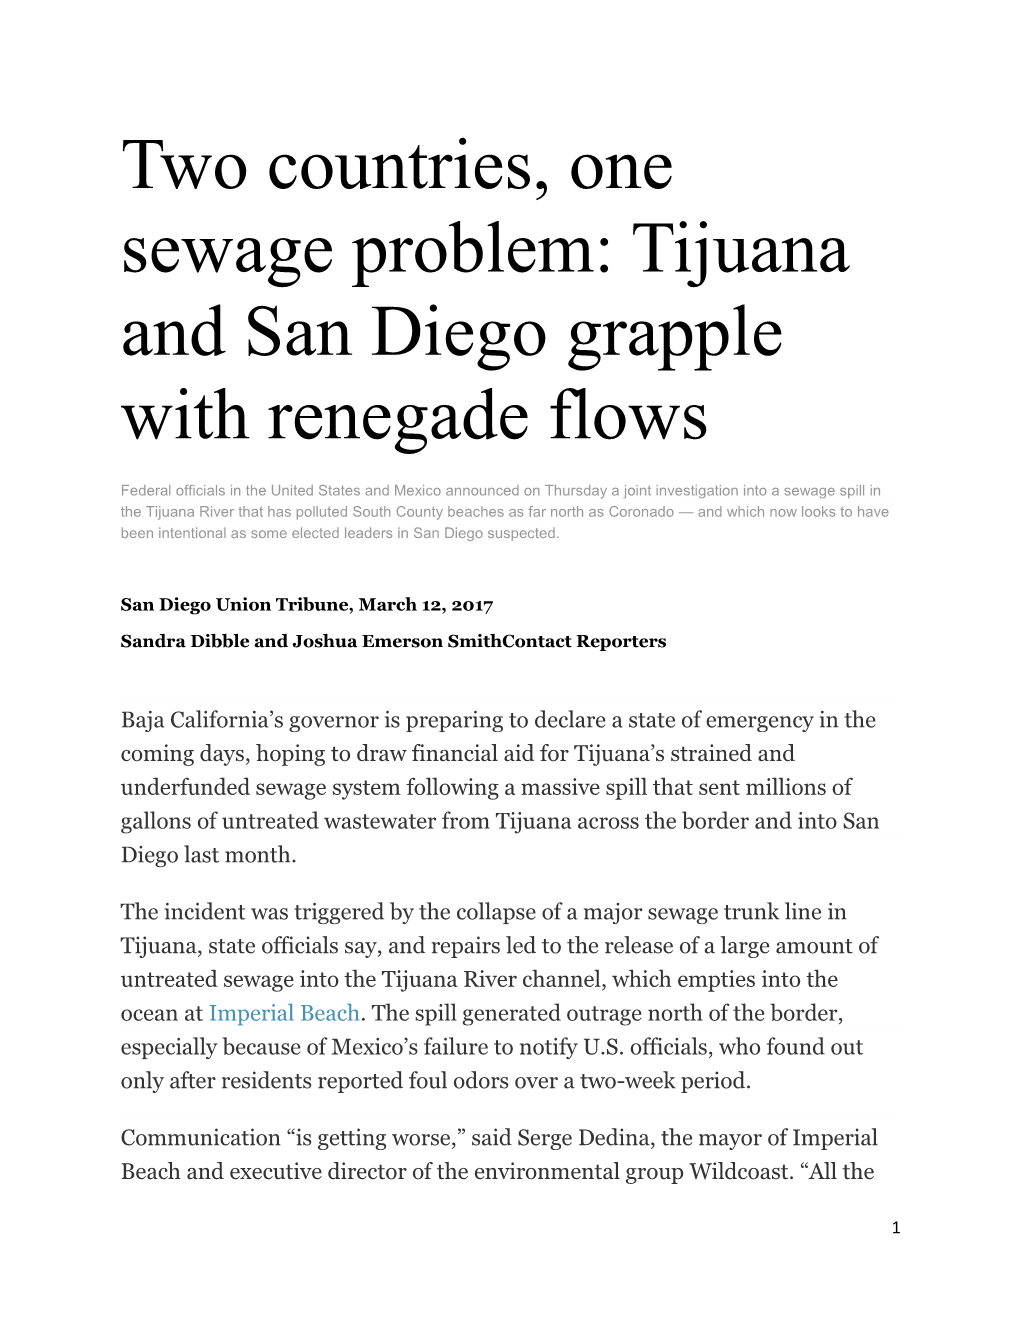 Two Countries, One Sewage Problem: Tijuana and San Diego Grapple with Renegade Flows